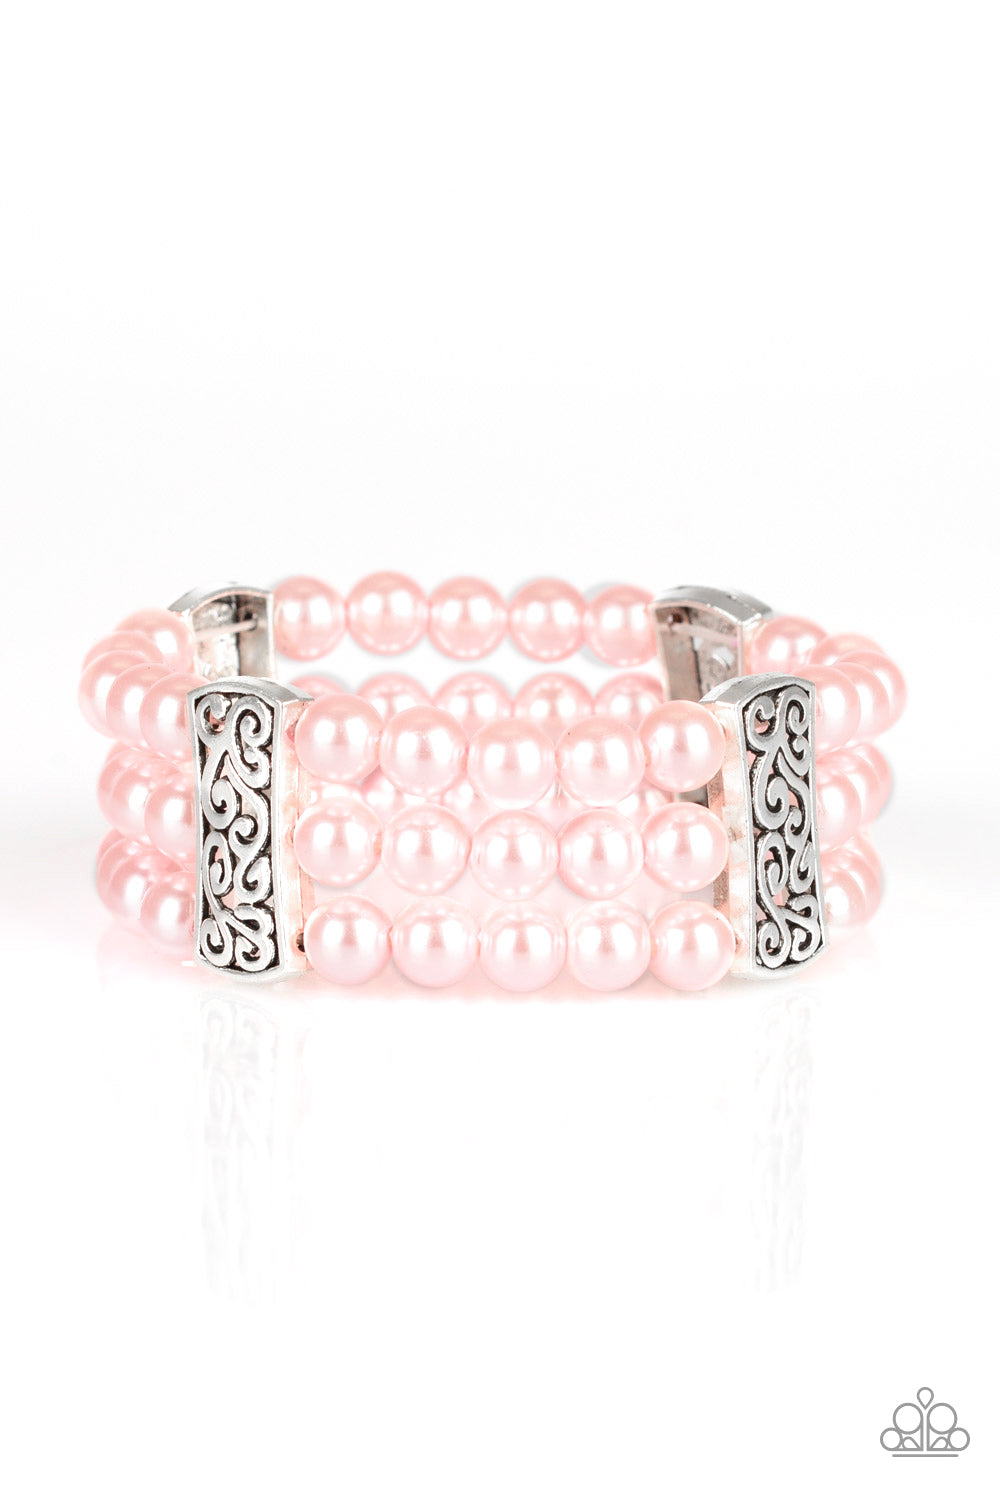 Sweetheart Secrets  Pink and Silver Heart Bracelet  Paparazzi Access   Bejeweled Accessories By Kristie